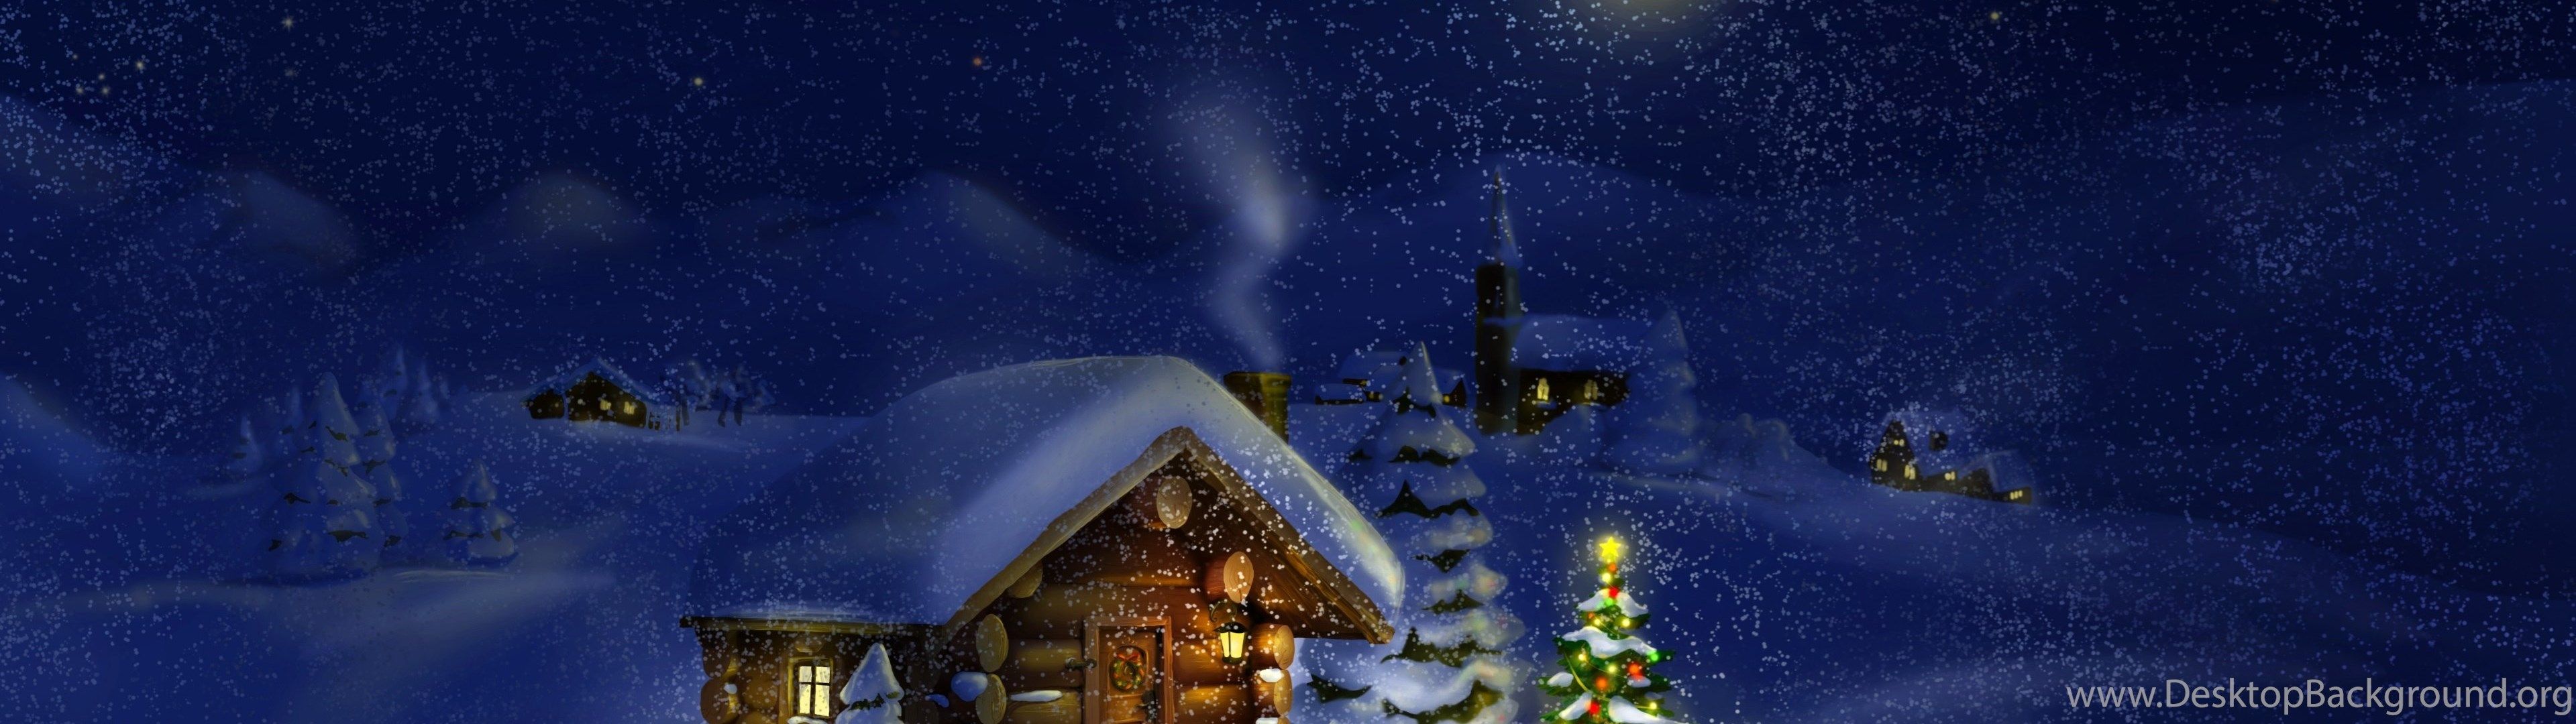 Christmas 3840X1080 Wallpapers - Wallpaper Cave